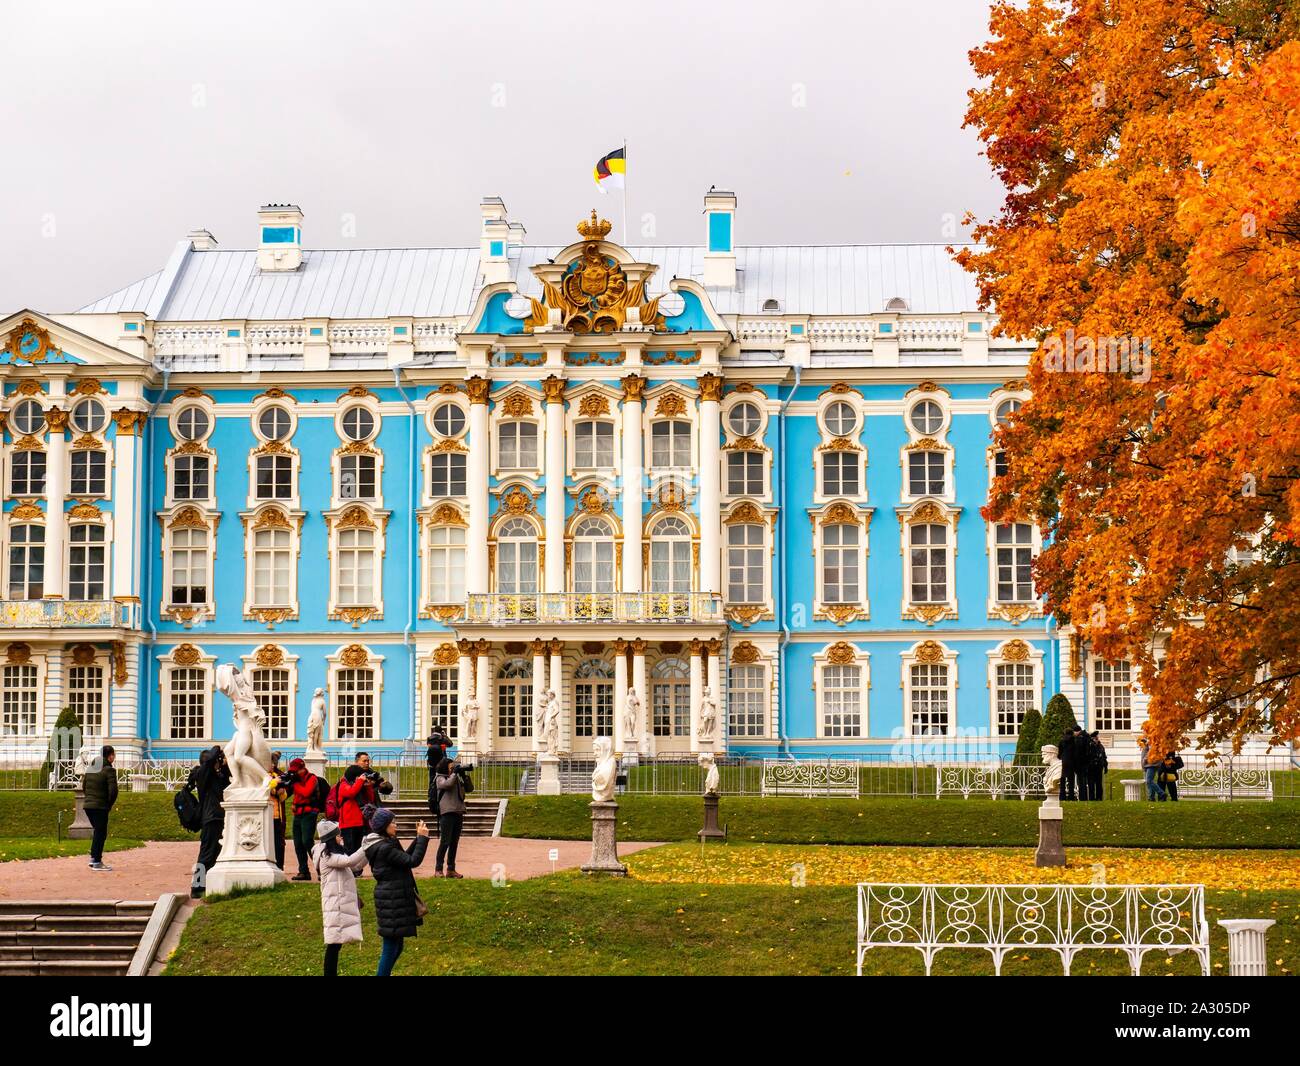 Tsar’s Village (Pushkin), Russia, 4th October 2019. Autumn colours at the Summer Palace of the Russian Tsars. Beautiful orange and gold colours of the trees around Catherine Palace and Catherine Park garden with Asian tourists taking photographs Stock Photo